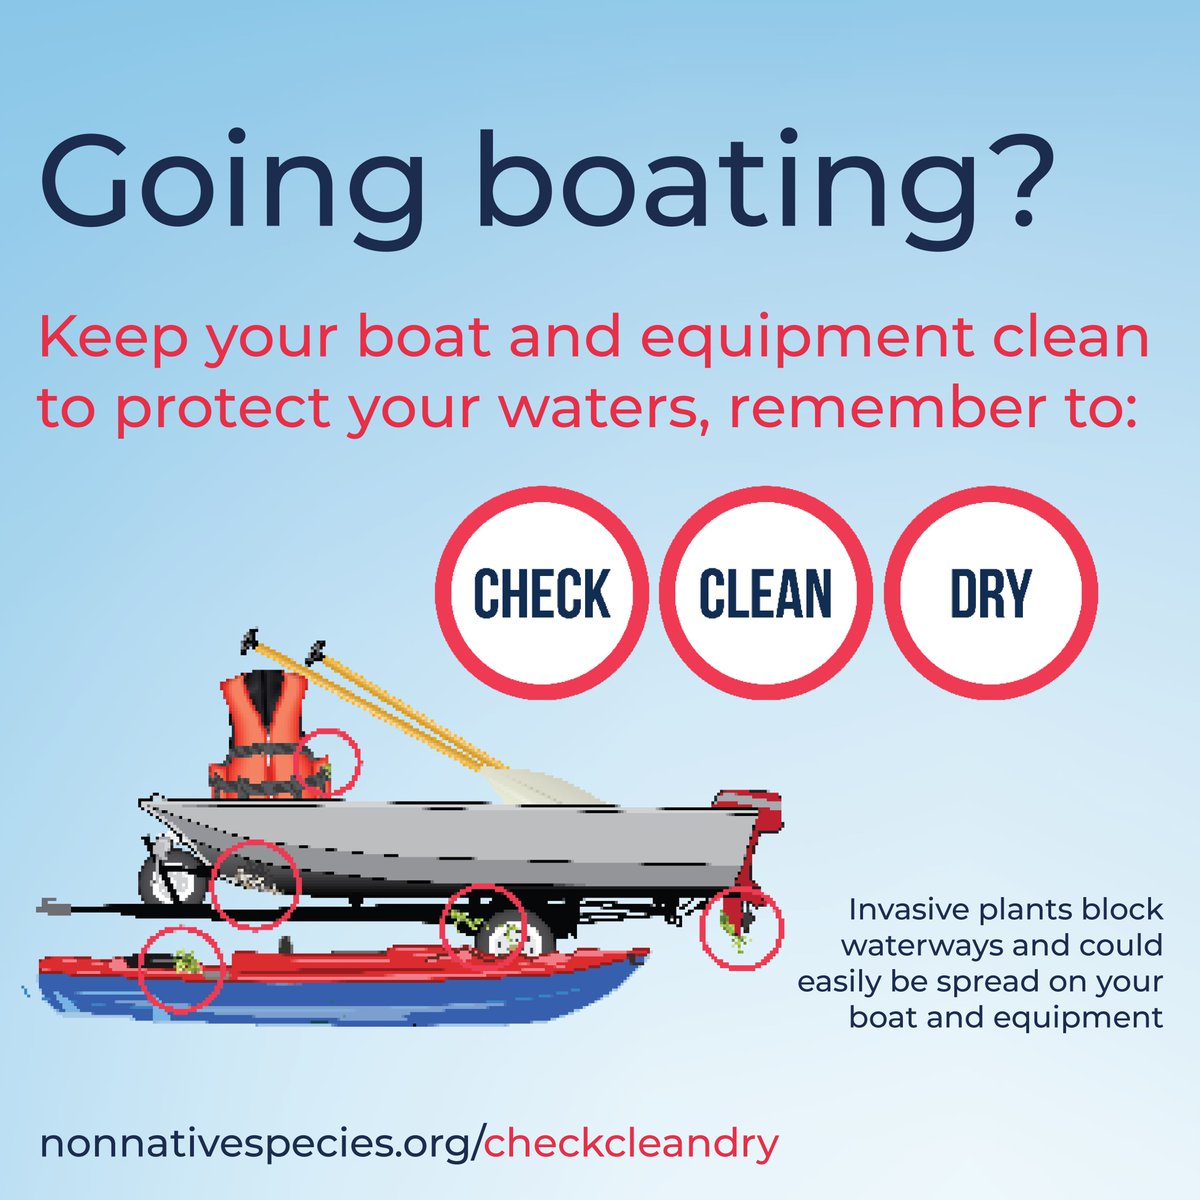 Going boating? ⛵️🚤🛥️ 🚣‍♀️ Invasive non-native plants and animals block waterways and can damage boats. To help prevent this, remember to: 🔎Check 🚿Clean ☀️Dry after you leave the water. It's even more important if you've been abroad! Visit nonnativespecies.org/what-can-i-do/…